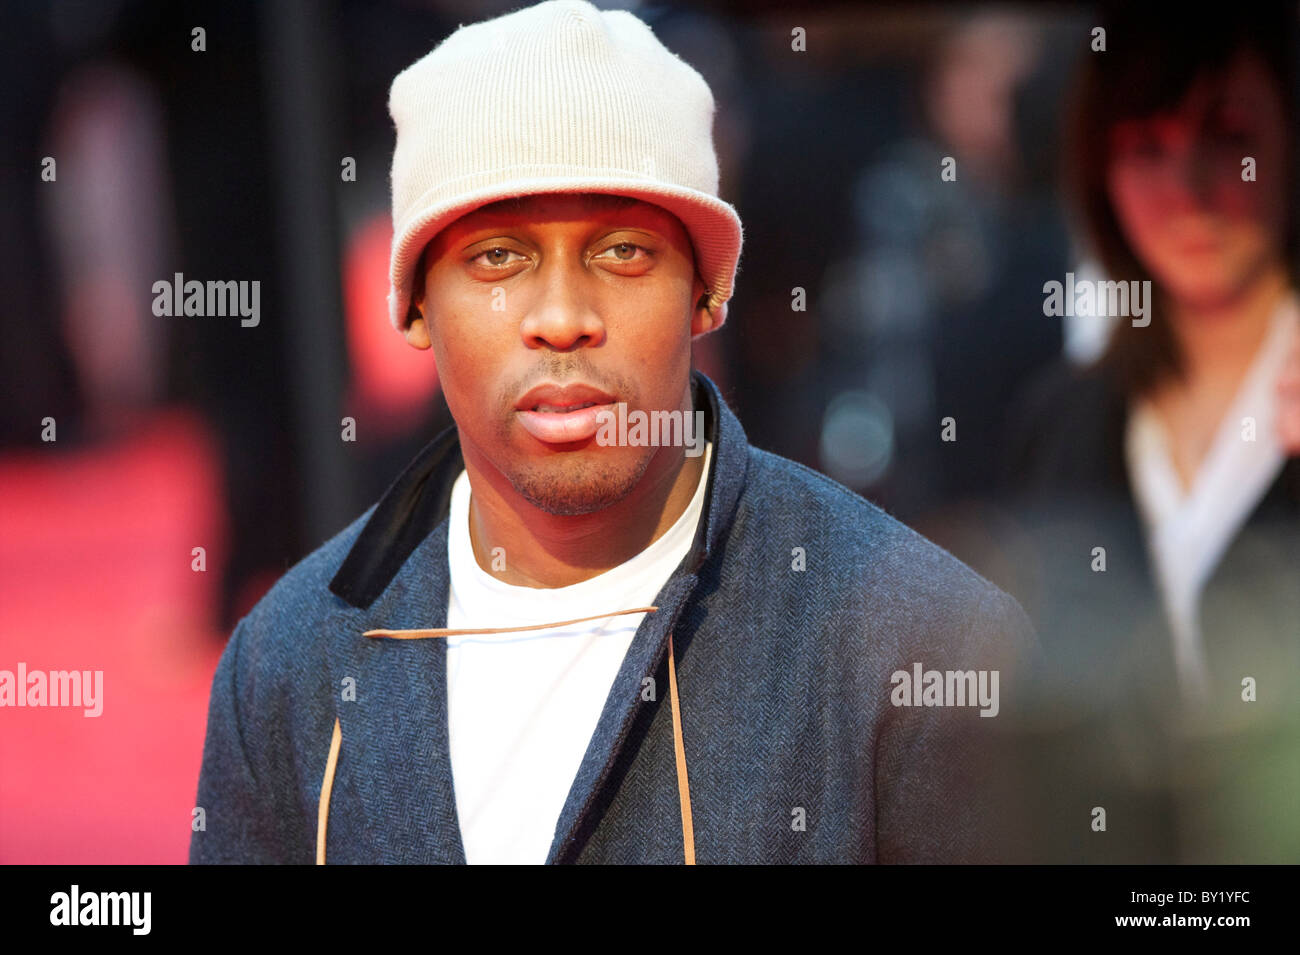 Singer Lemar attends the world premiere of 'The Clash of the Titans,' a remake of the 1981 film, at Empire Leicester Square, Stock Photo